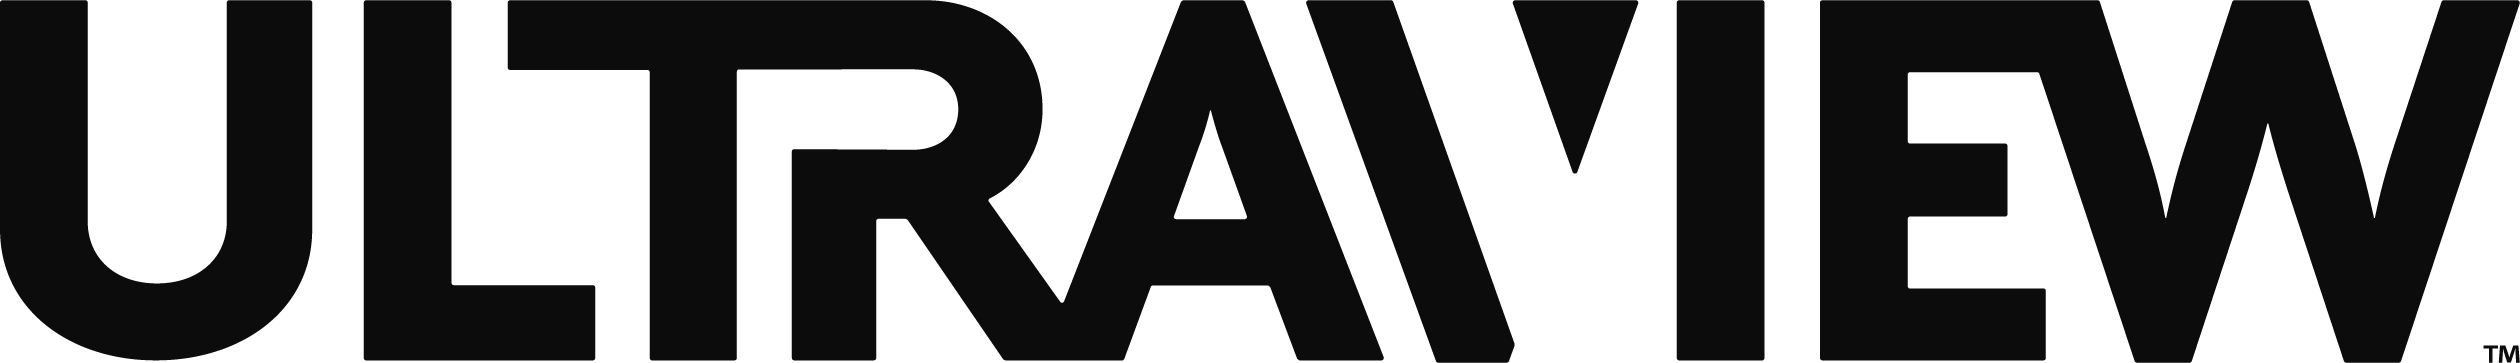 Copy of Copy of ULTRAVIEW_Wordmark_Black_one color.png